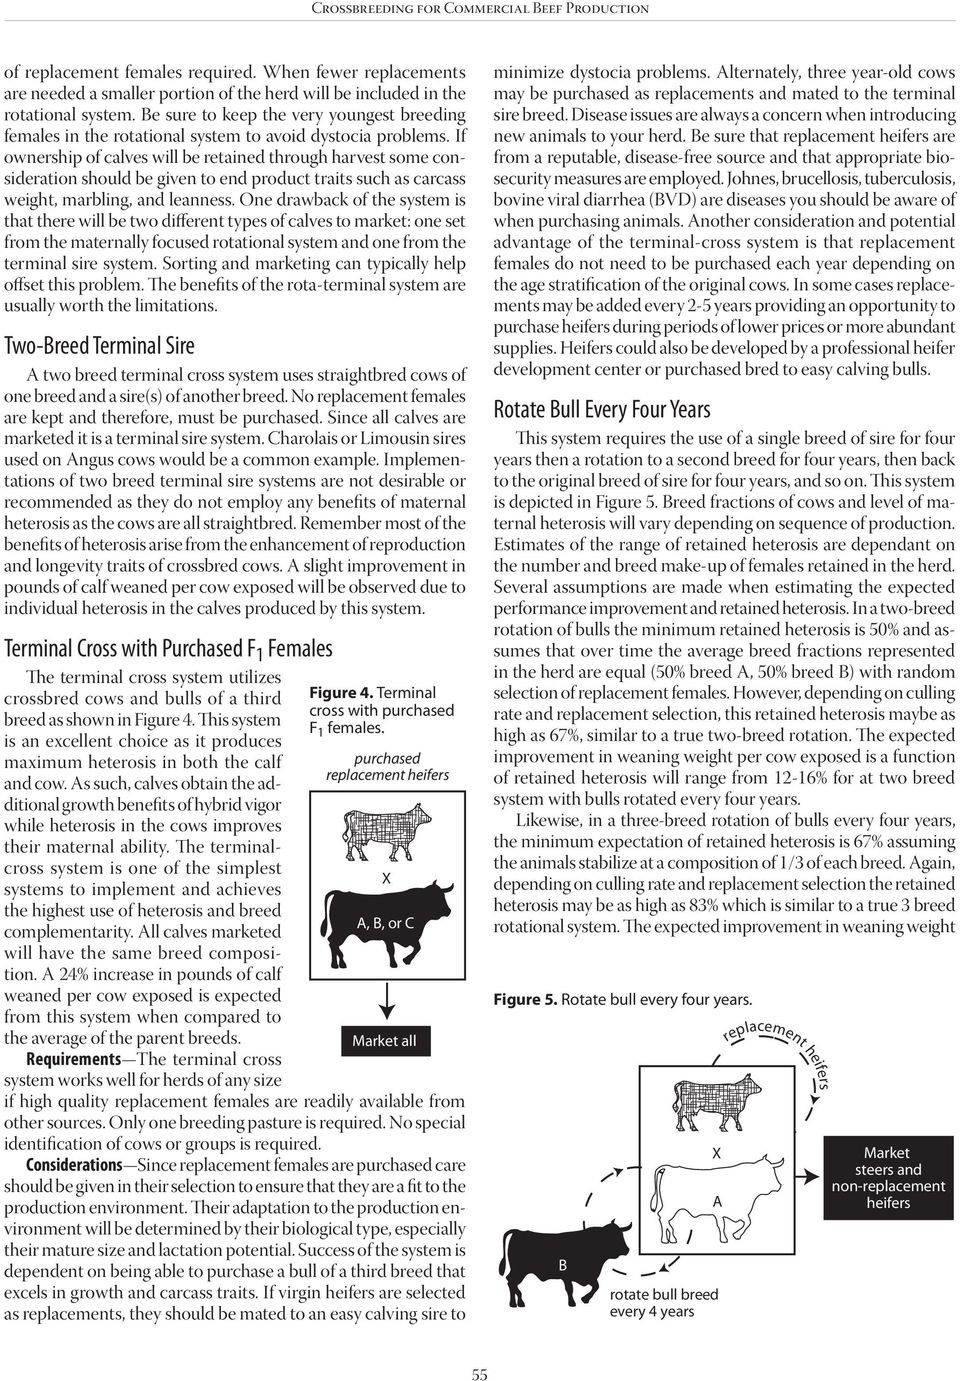 If ownership of calves will be retained through harvest some consideration should be given to end product traits such as carcass weight, marbling, and leanness.